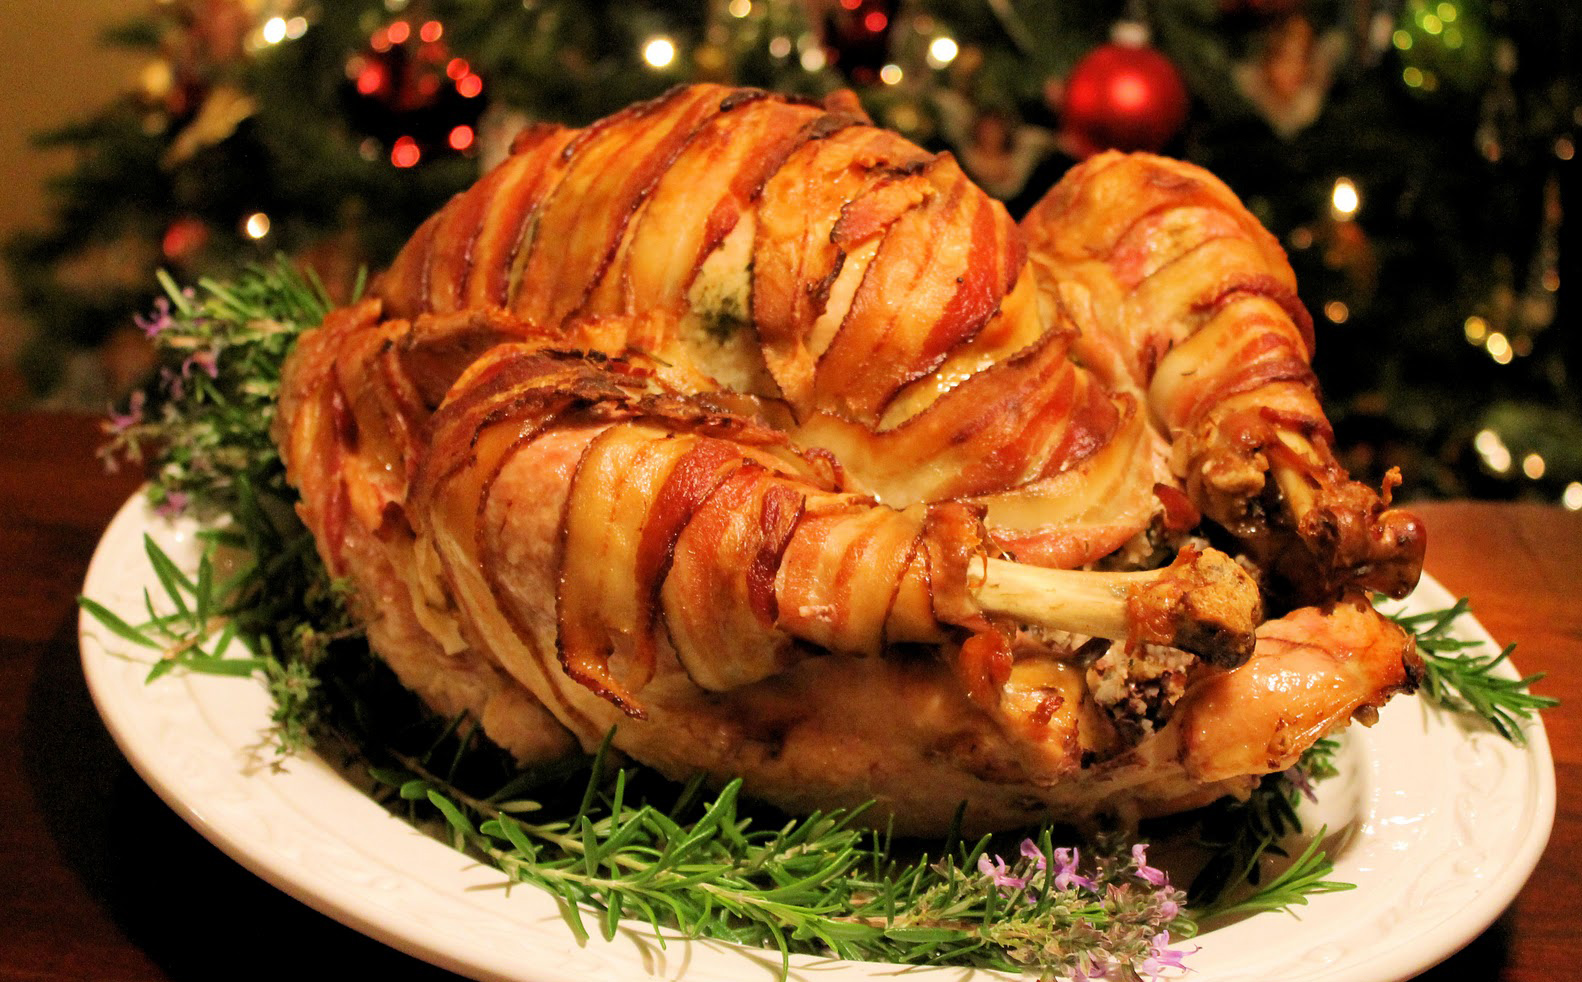 A Christmas message: Bacon and turkey not necessarily a recipe for